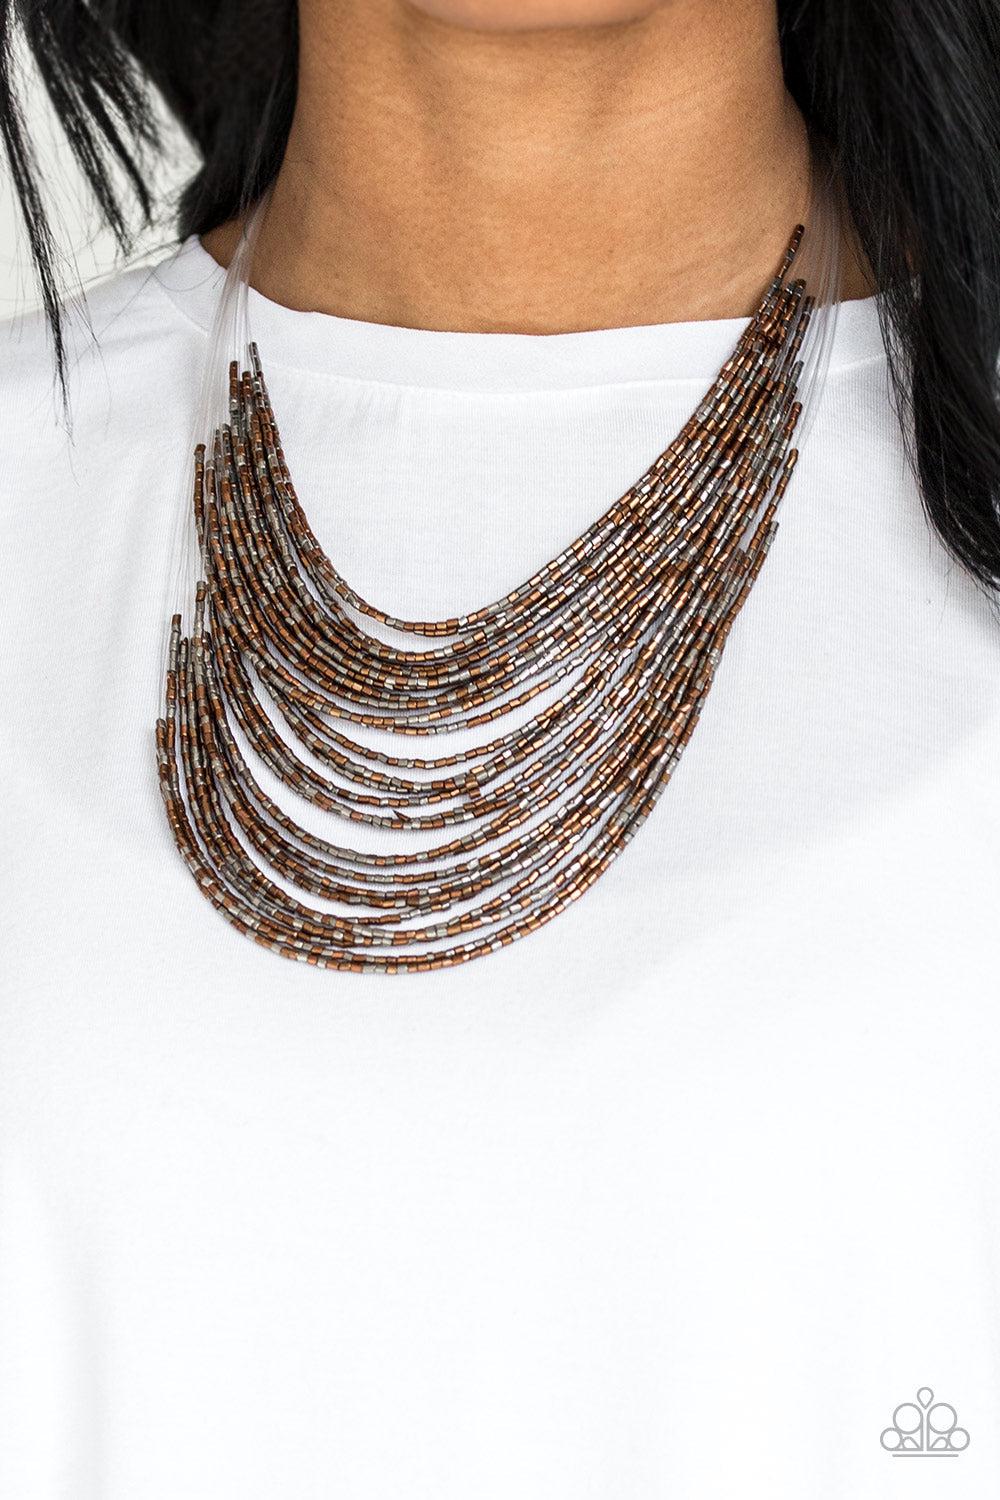 Catwalk Queen Multi Copper & Gunmetal Seed Bead Necklace - Paparazzi Accessories- lightbox - CarasShop.com - $5 Jewelry by Cara Jewels